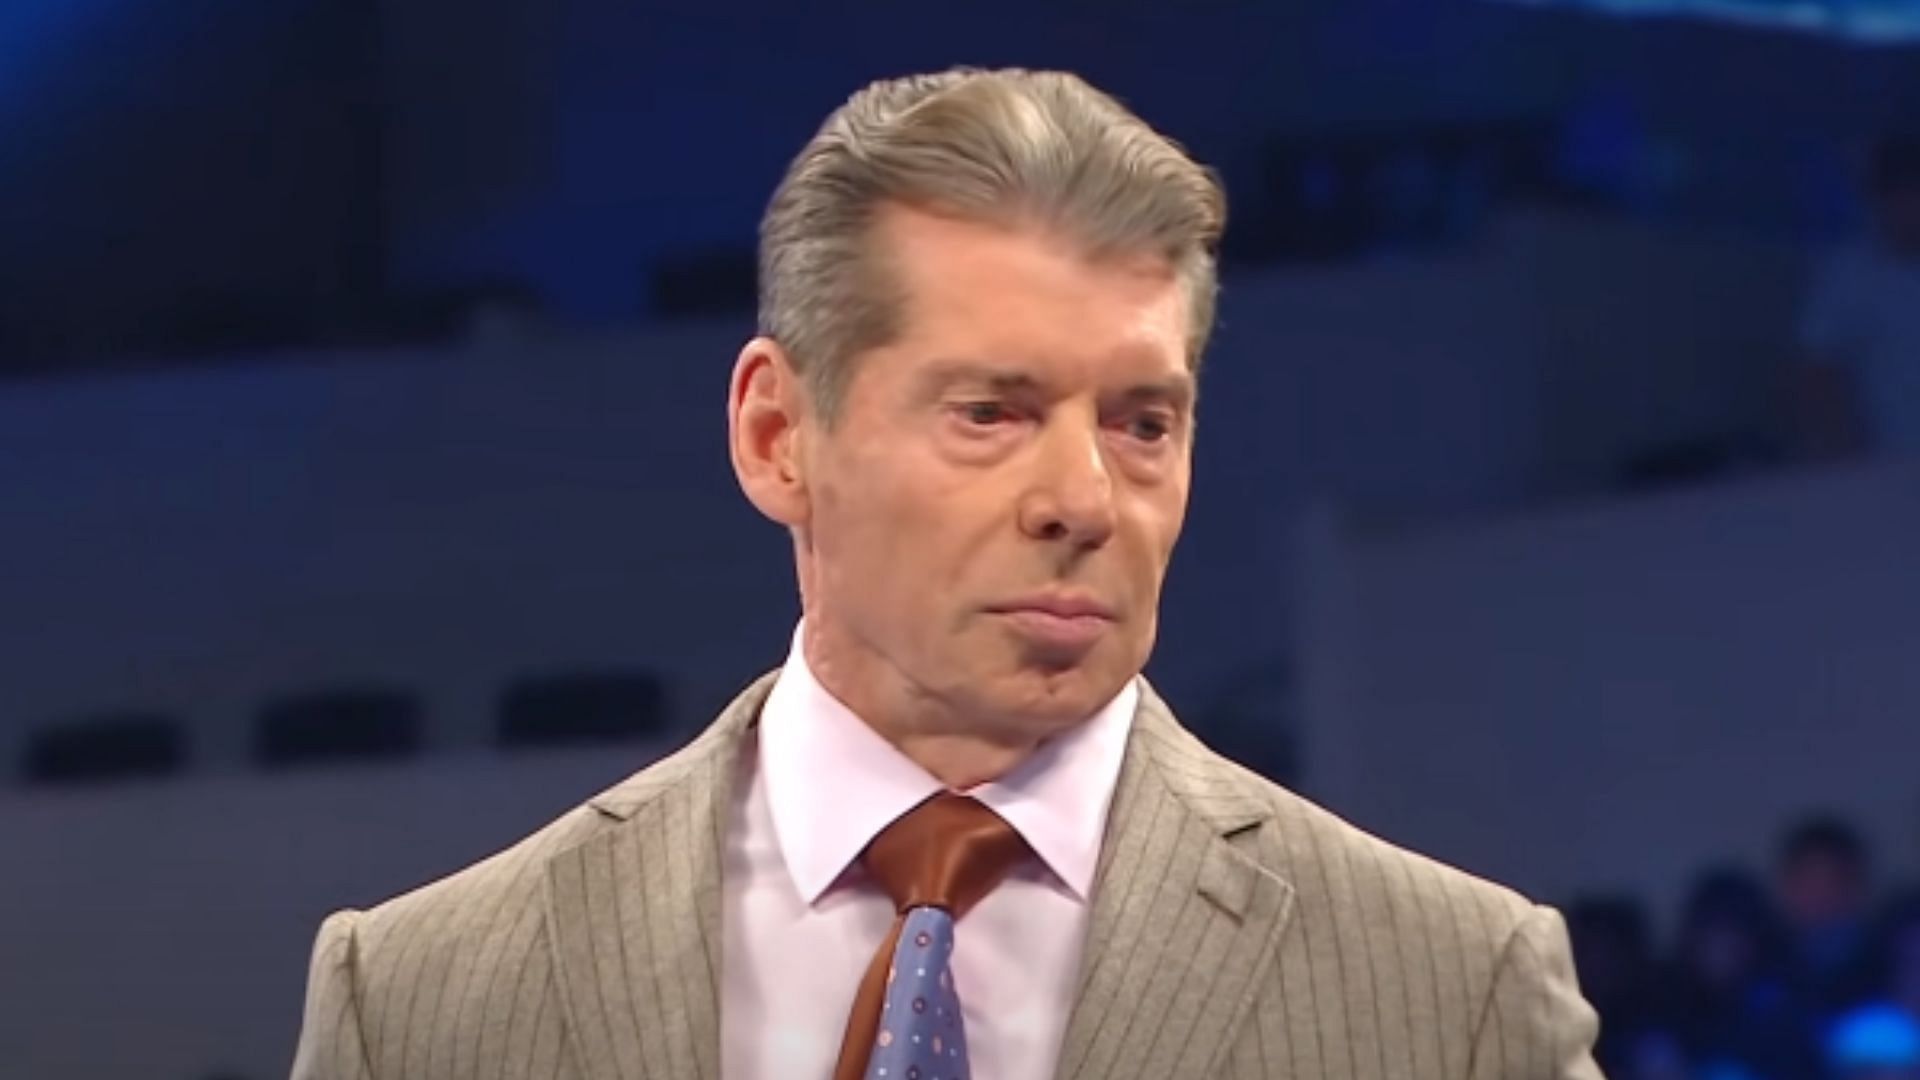 Vince McMahon had a rocky relationship with Shawn Michaels